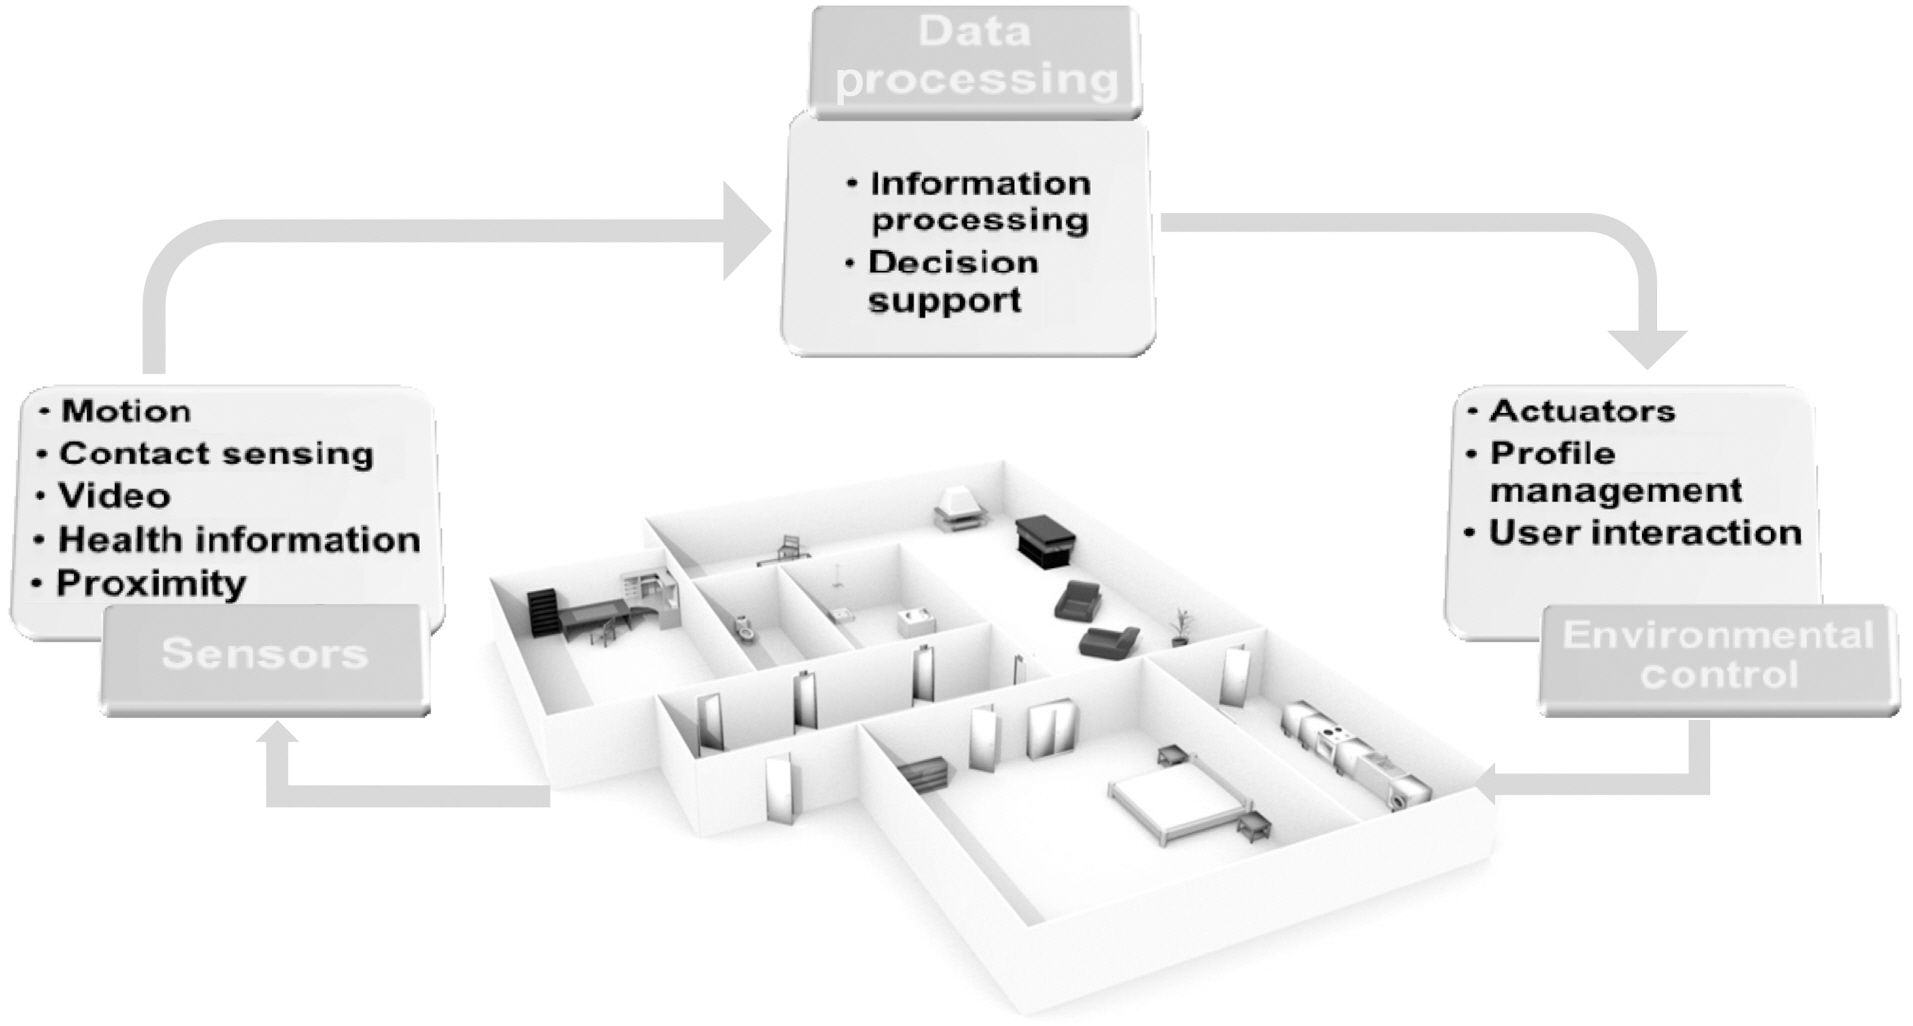 The Smart Home Paradigm with the three main components ofsensors data processing and environment control [5].